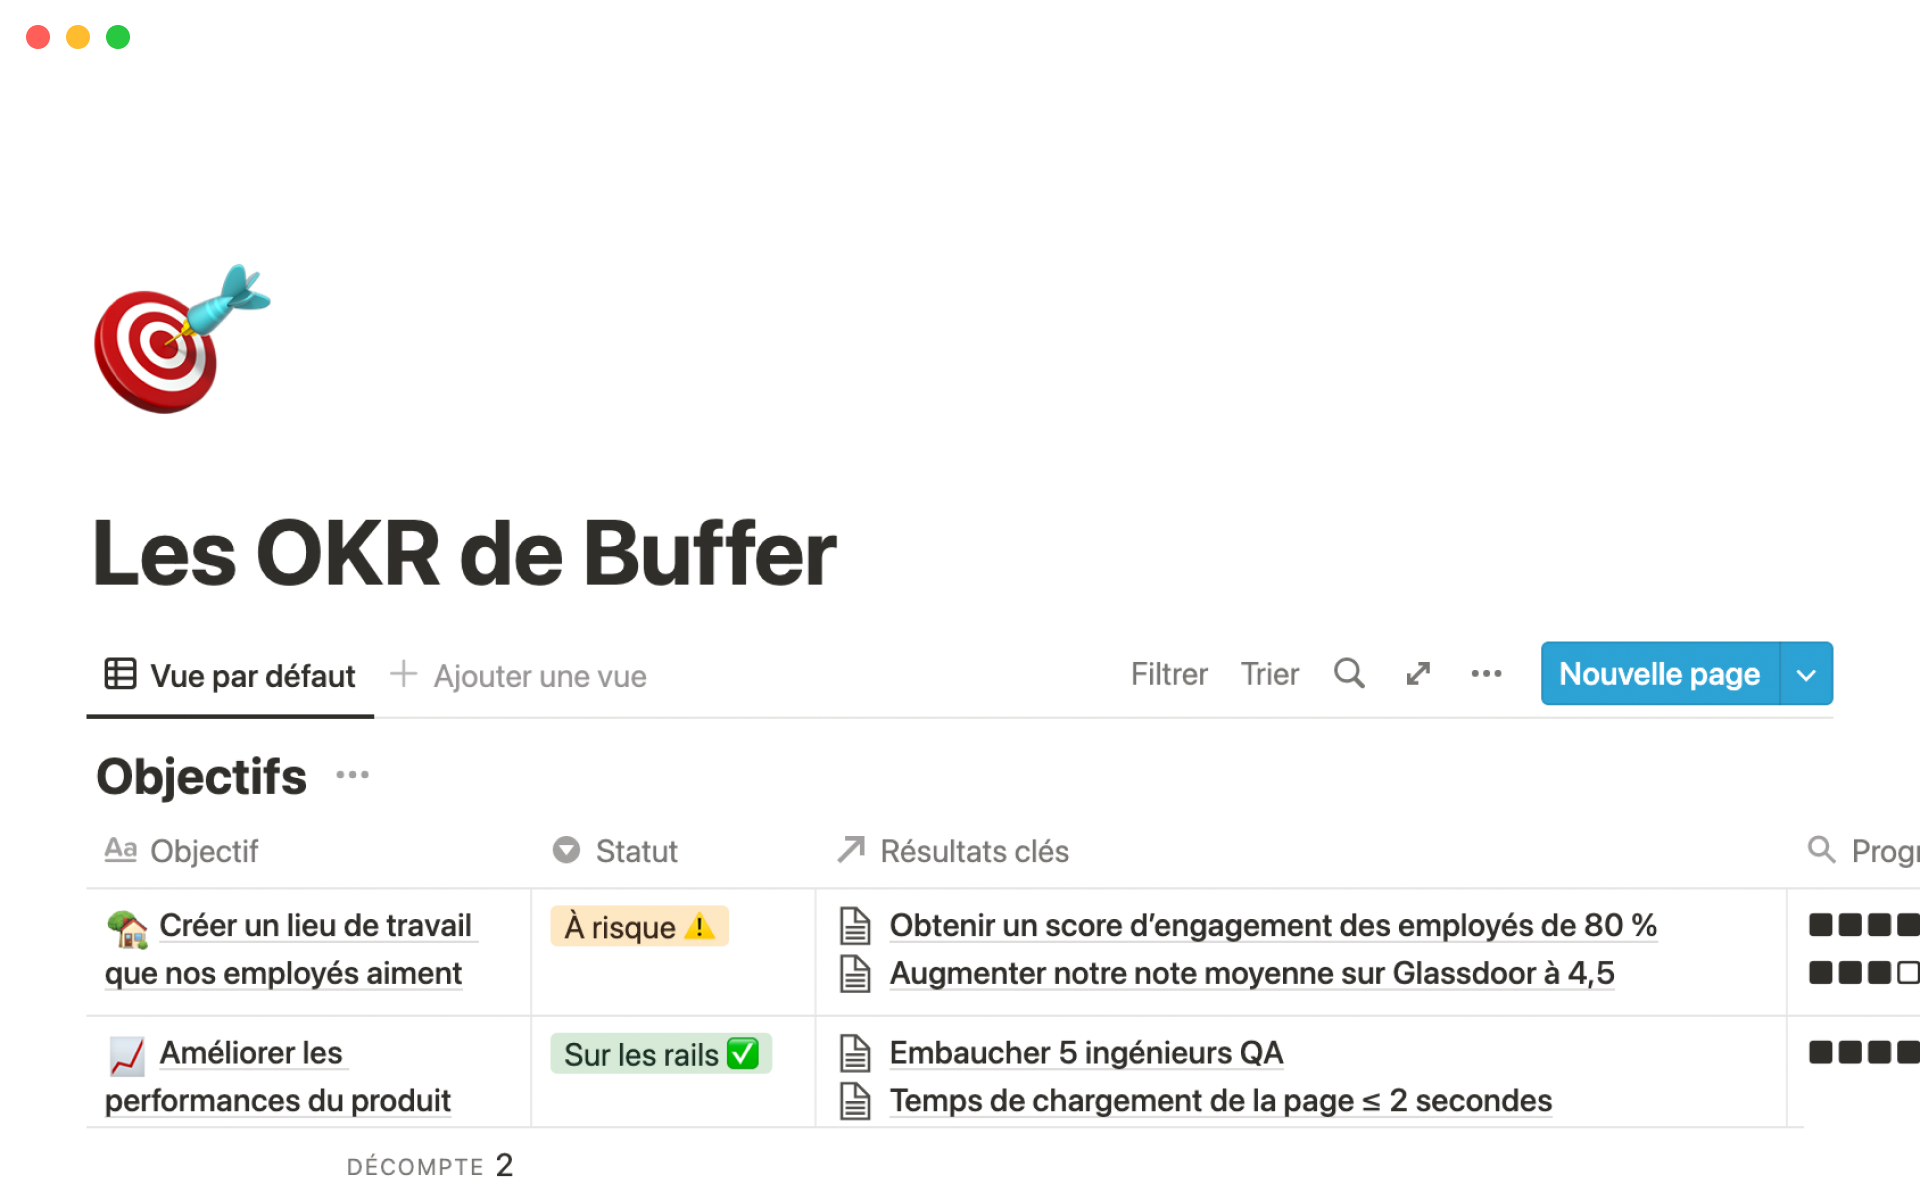 The desktop image for the Buffer's OKRs template